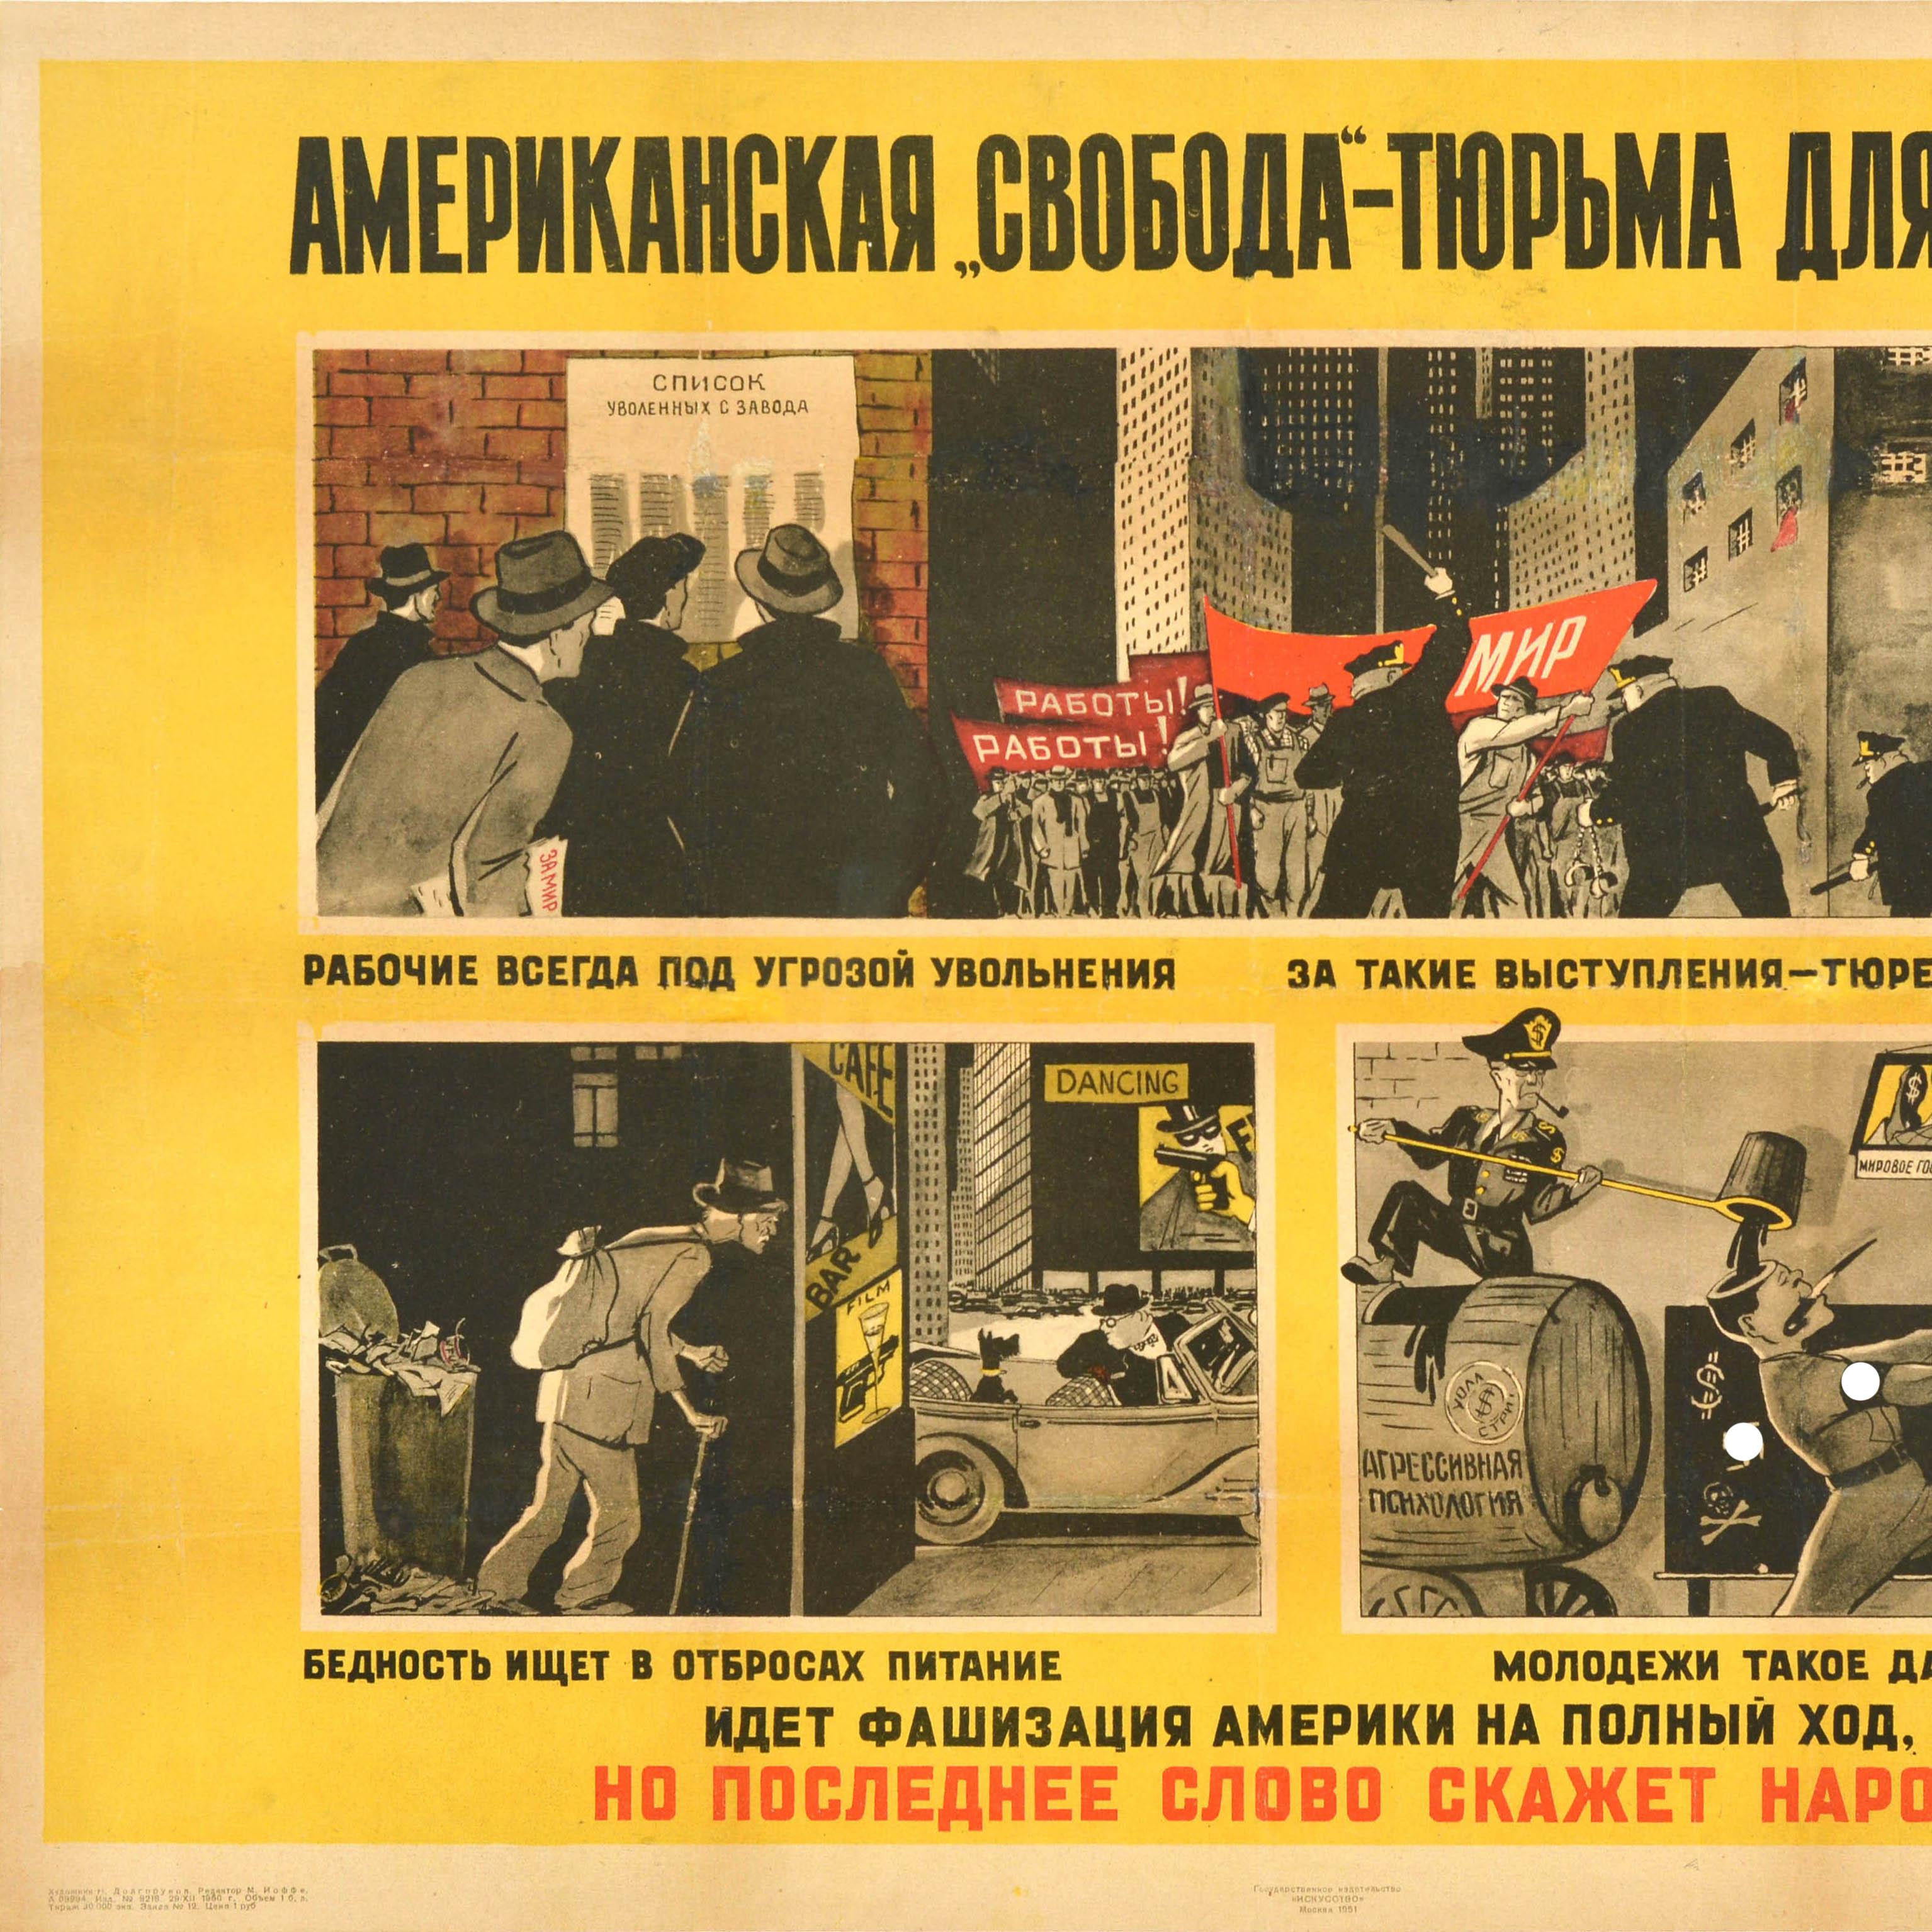 Original vintage Soviet propaganda poster - American Freedom is a Prison for the People The fascization of America is in full effect but the people have the last word! - featuring text below three political cartoon style illustrations showing people